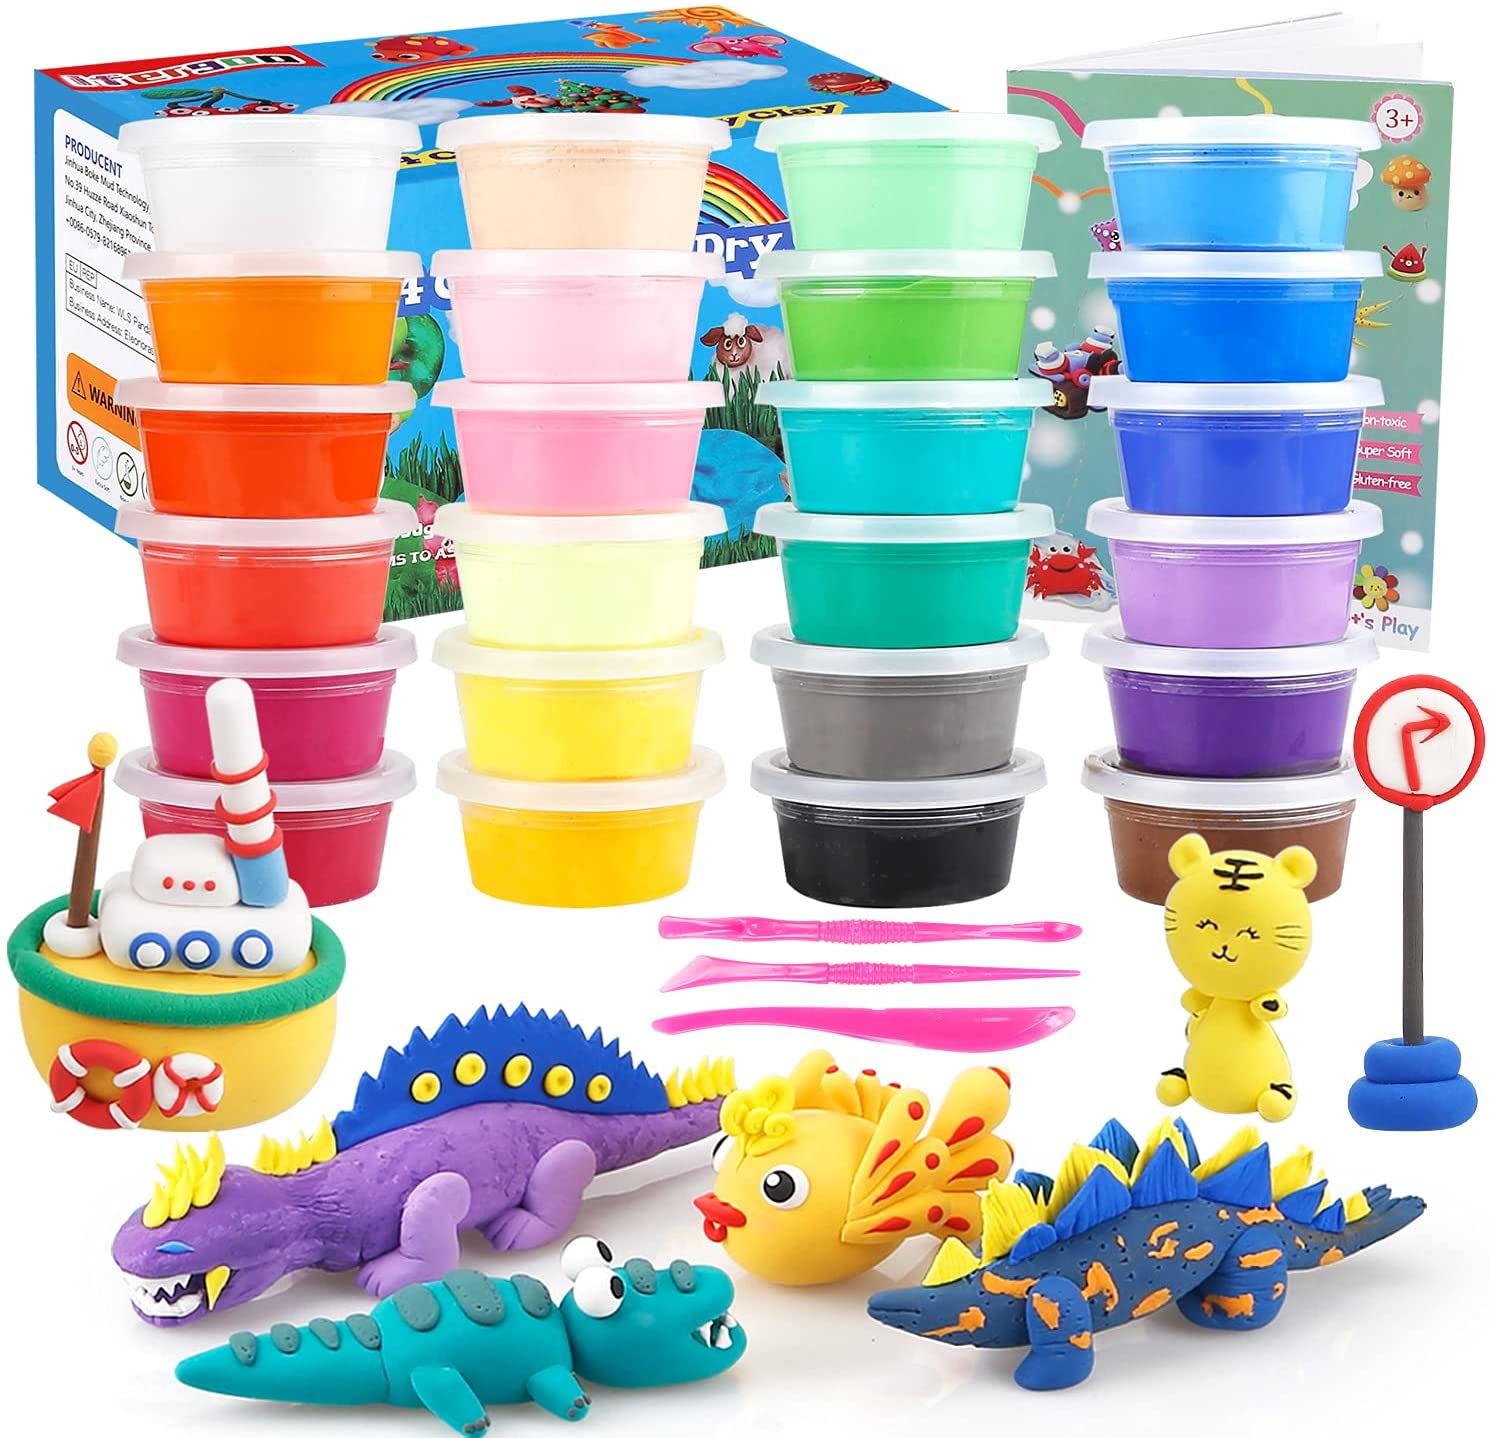 ifergoo Modeling Clay Kit - 24 Colors Magic Air Dry Ultra Light Clay, Safe  & Non-Toxic, Great Gift for Children